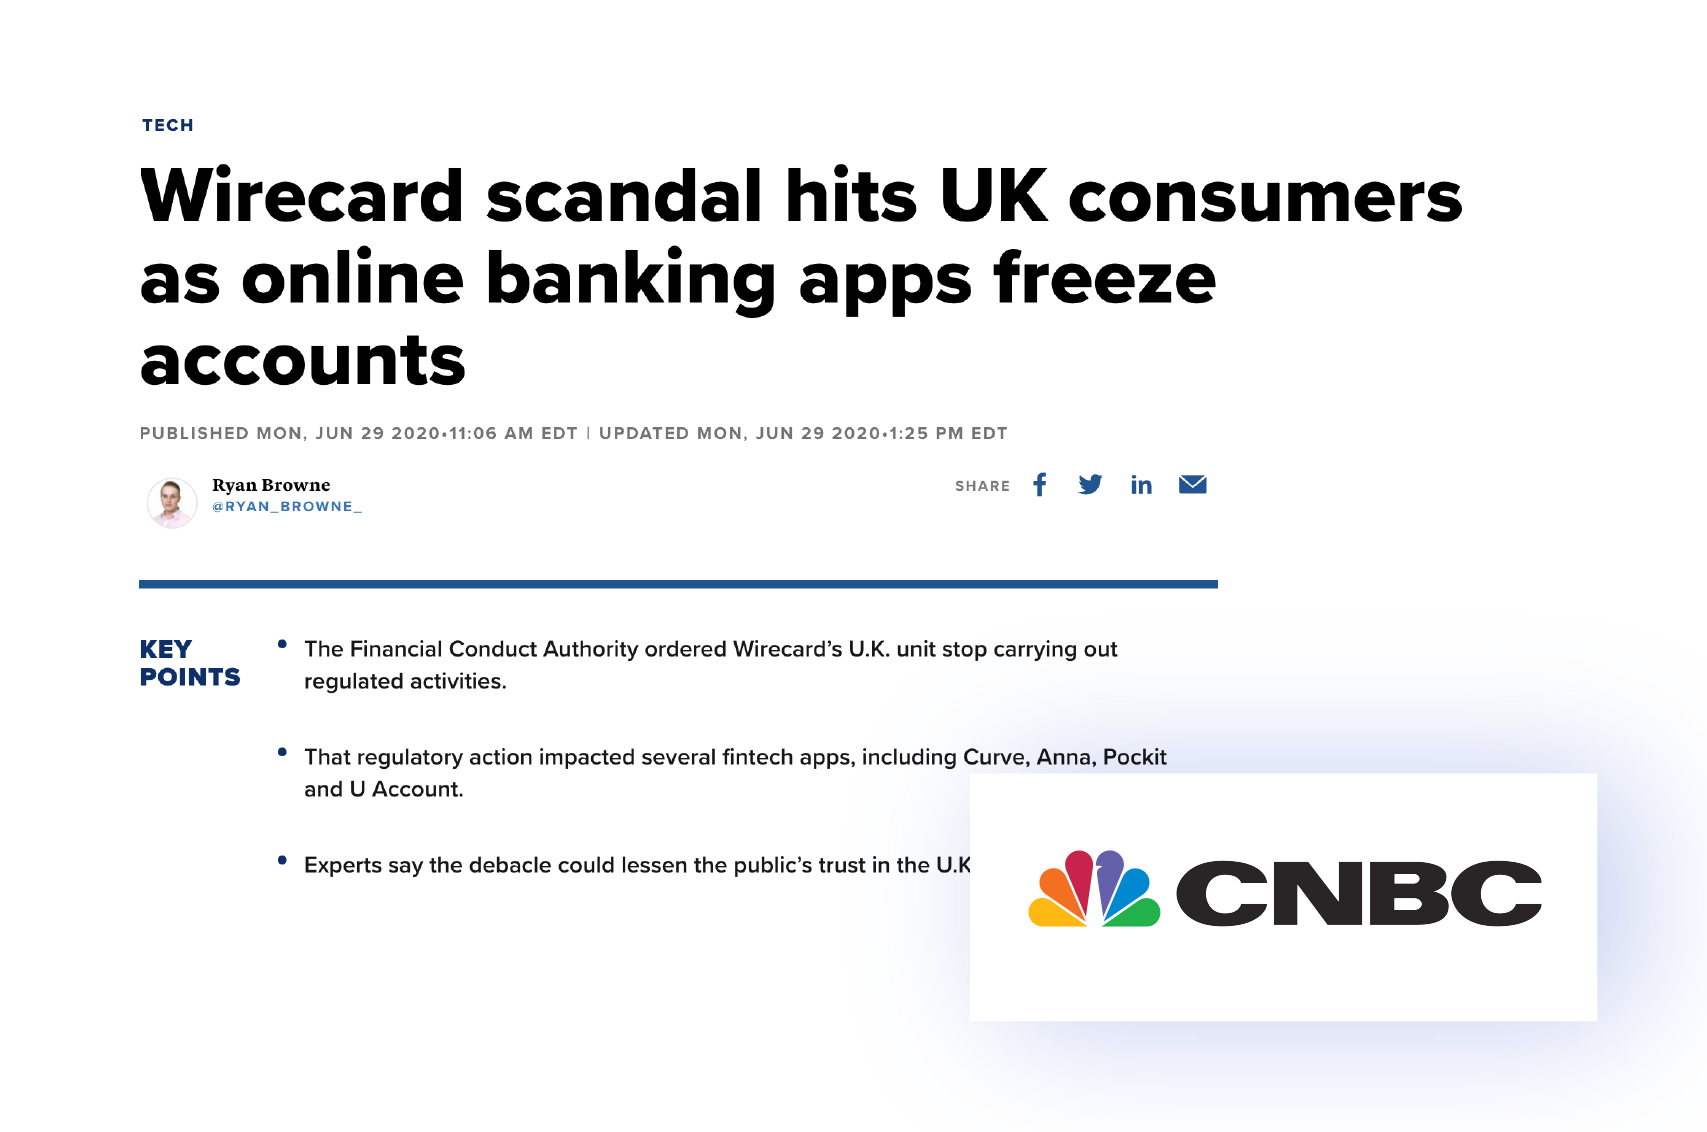 Wirecard impacted FinTech apps in the UK